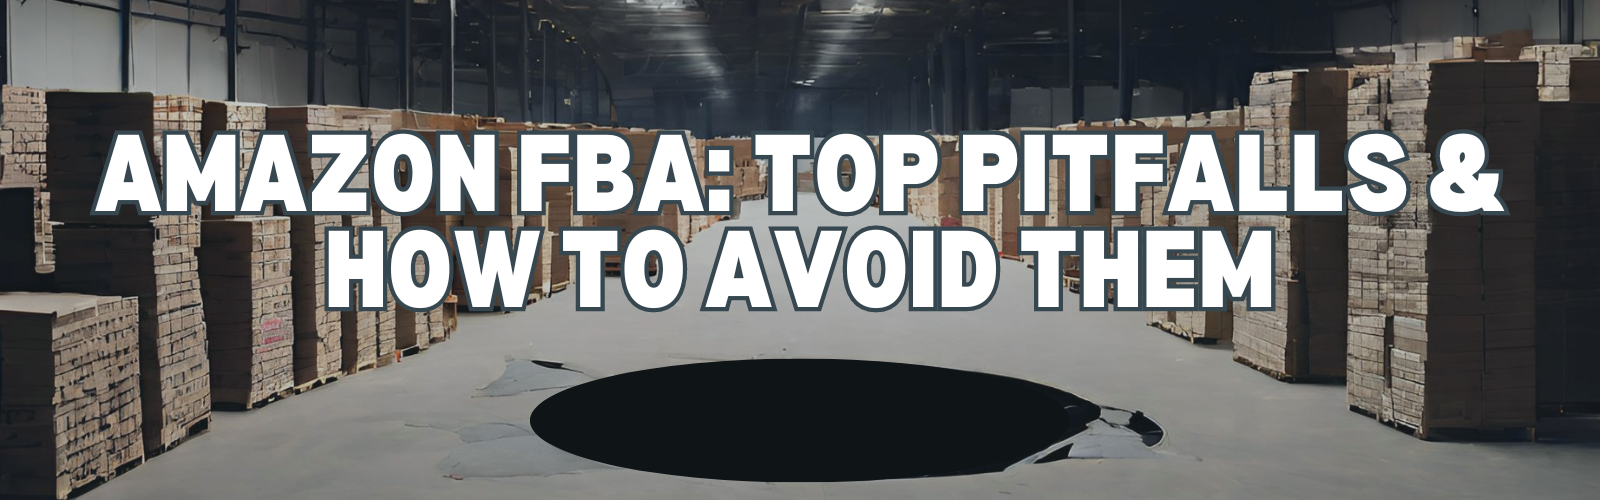 Amazon FBA - Top Pitfalls and How to Avoid Them